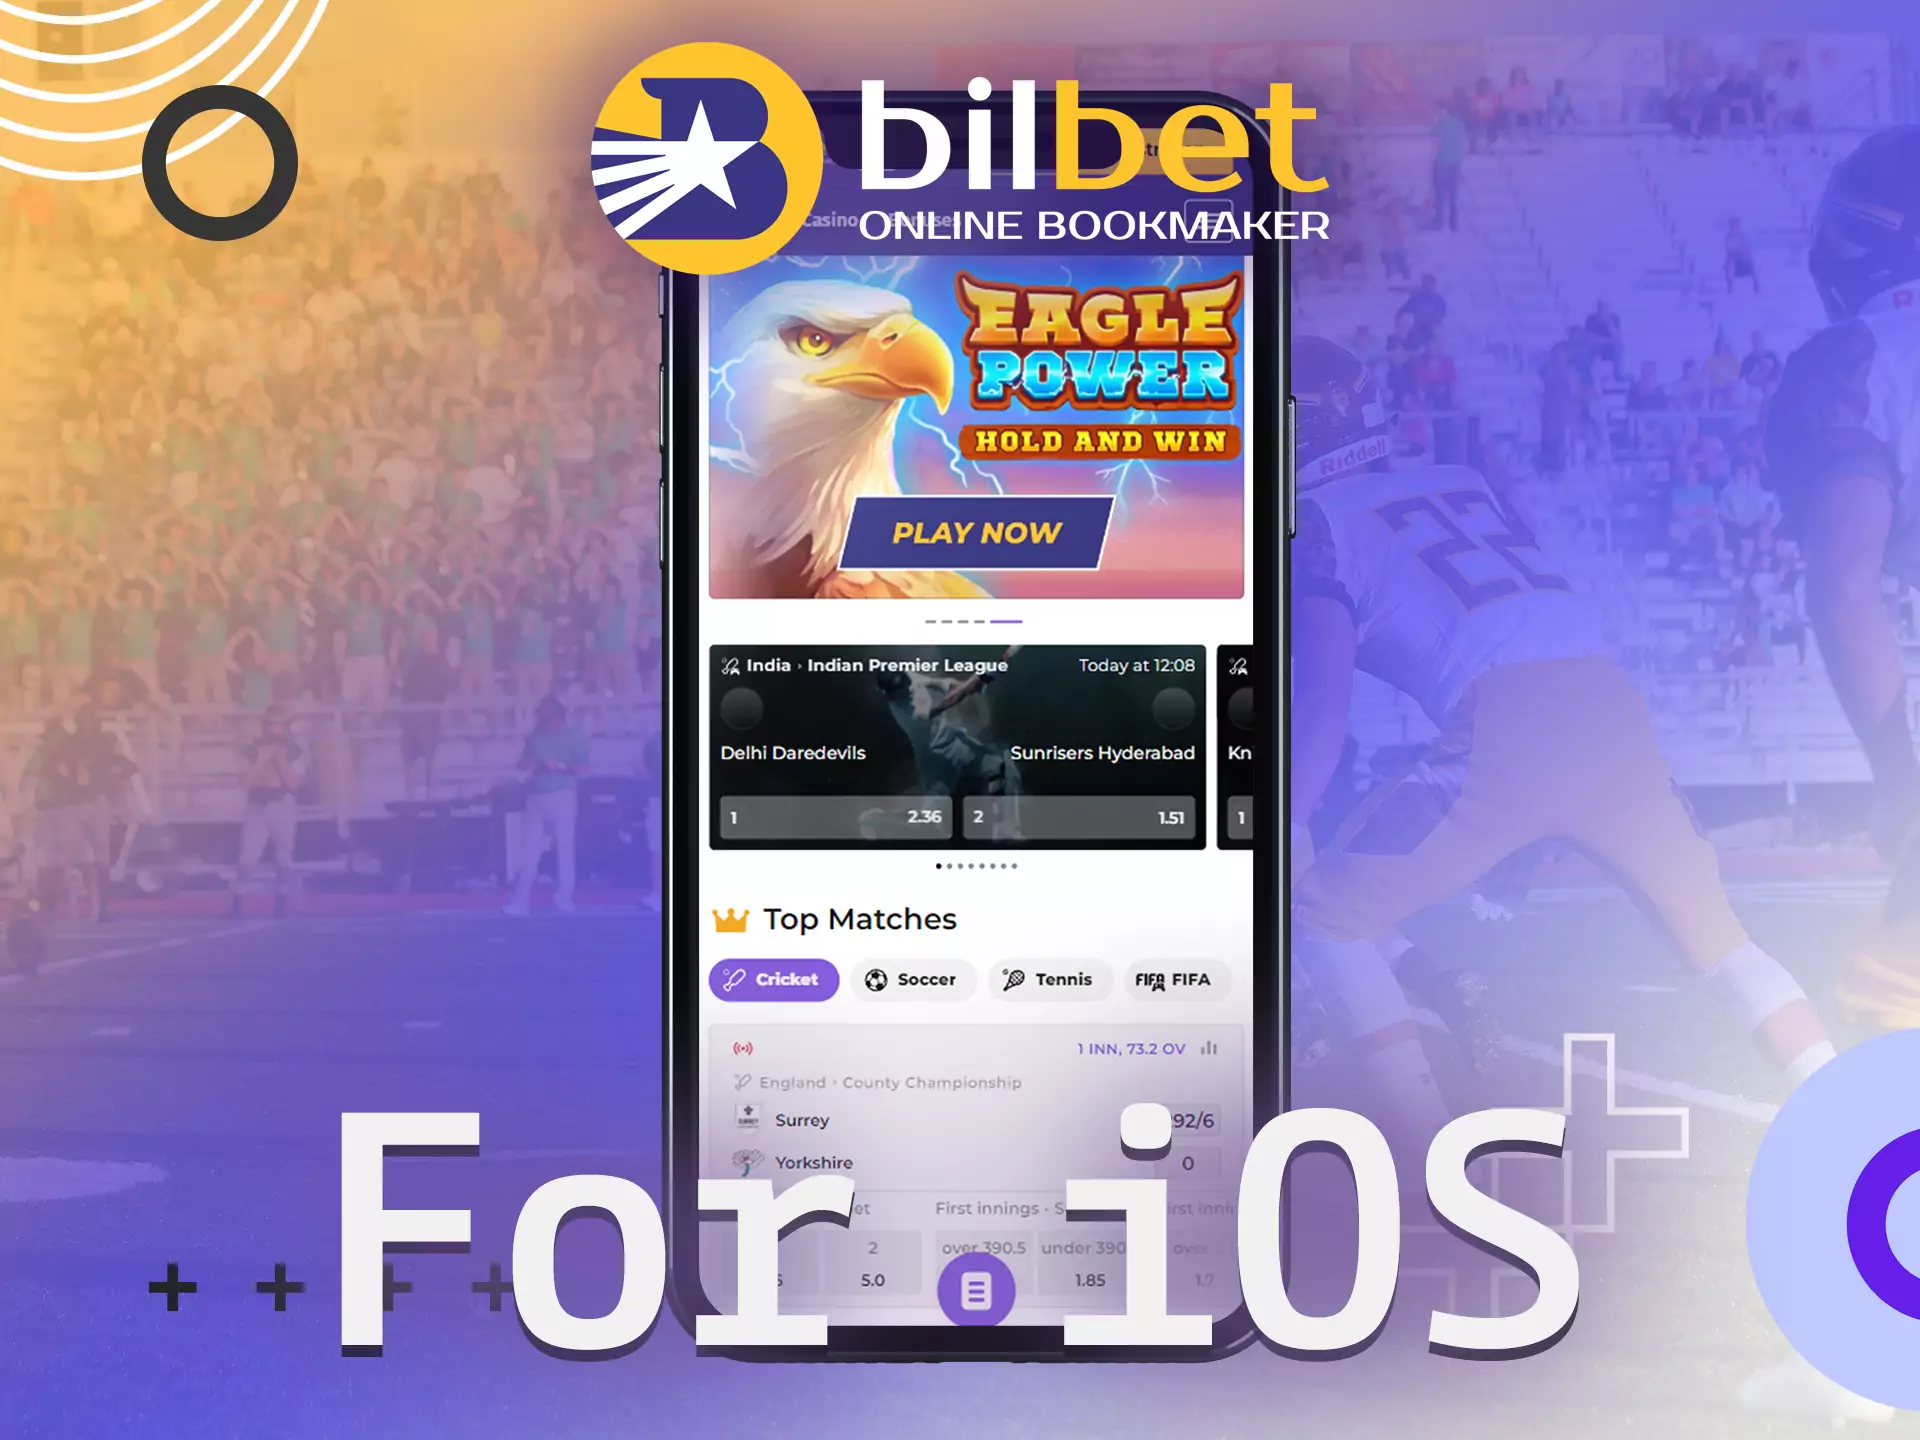 Since there is no app of Bilbet for iOS, use the mobile version of the site.